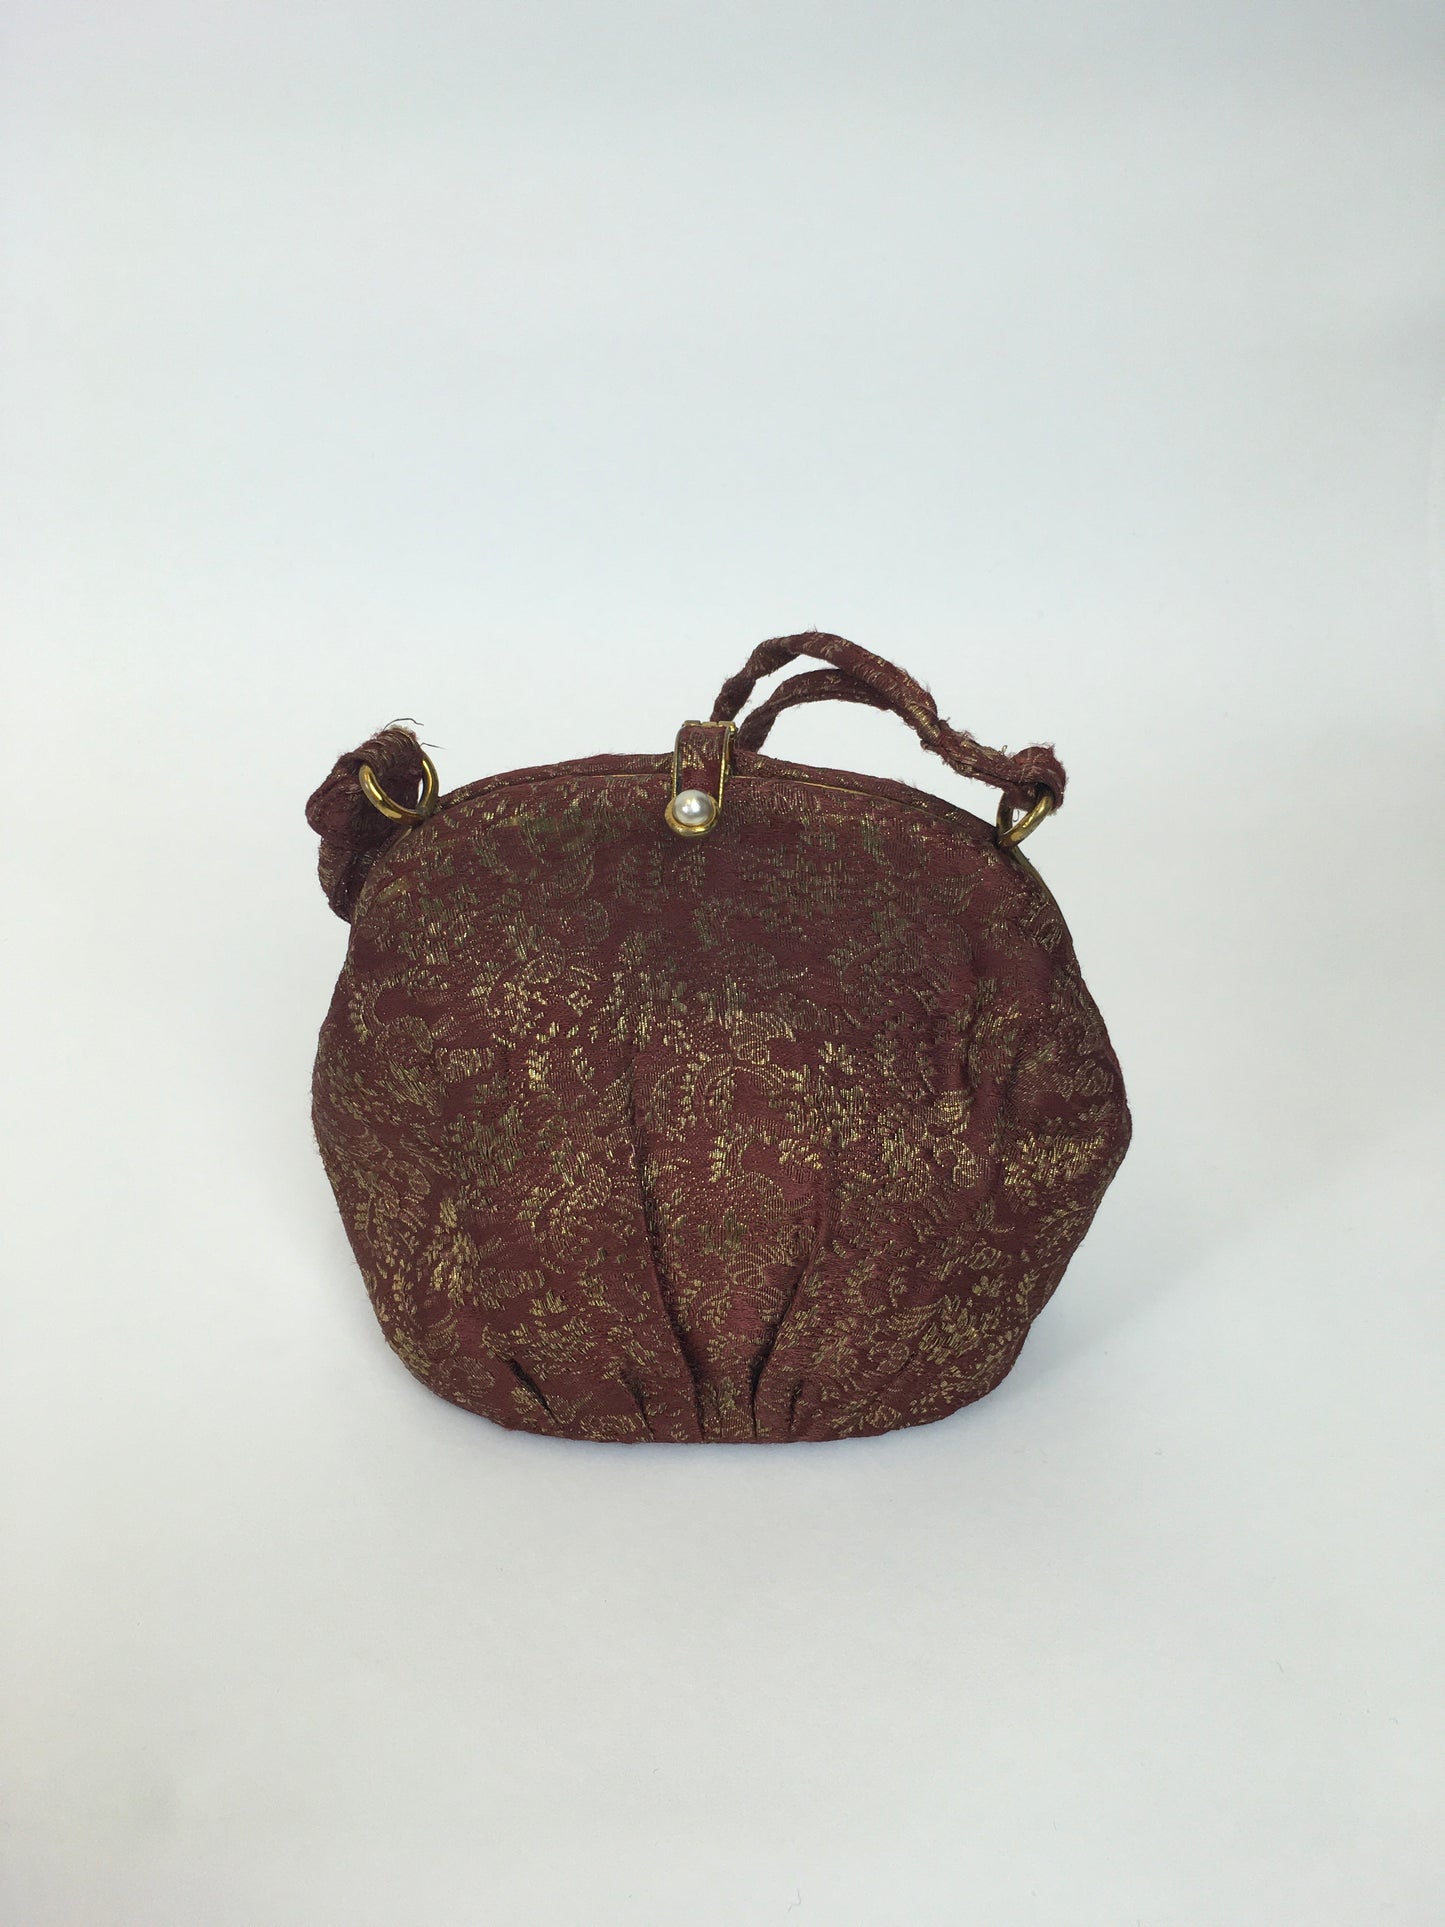 Original 1930’s Lame Evening Bag - In A Beautiful Burgundy with Gold Lame Floral Brocade